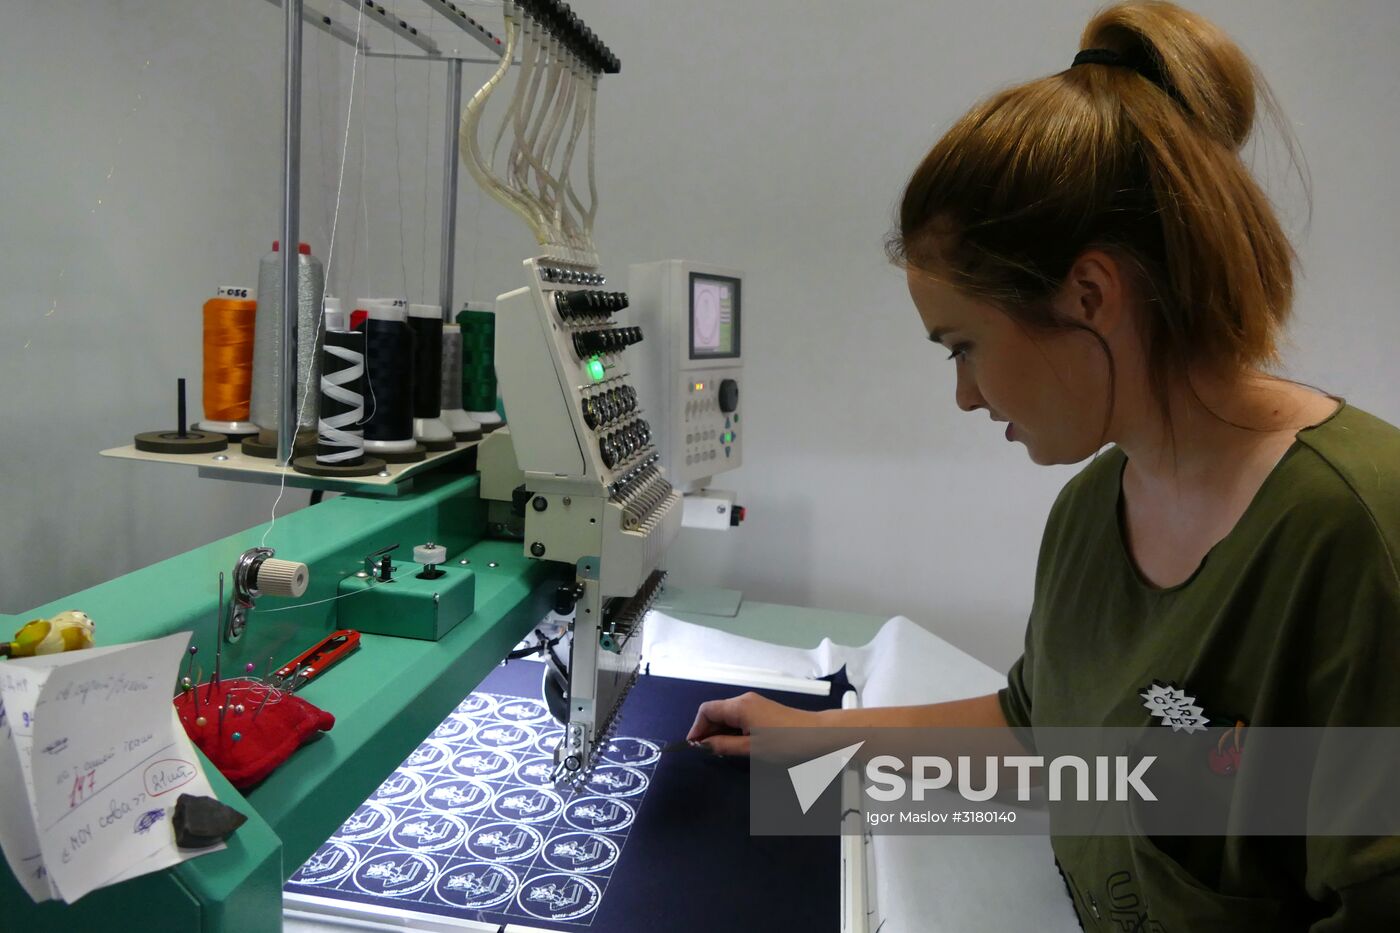 School uniform manufacturing and selling in Donetsk